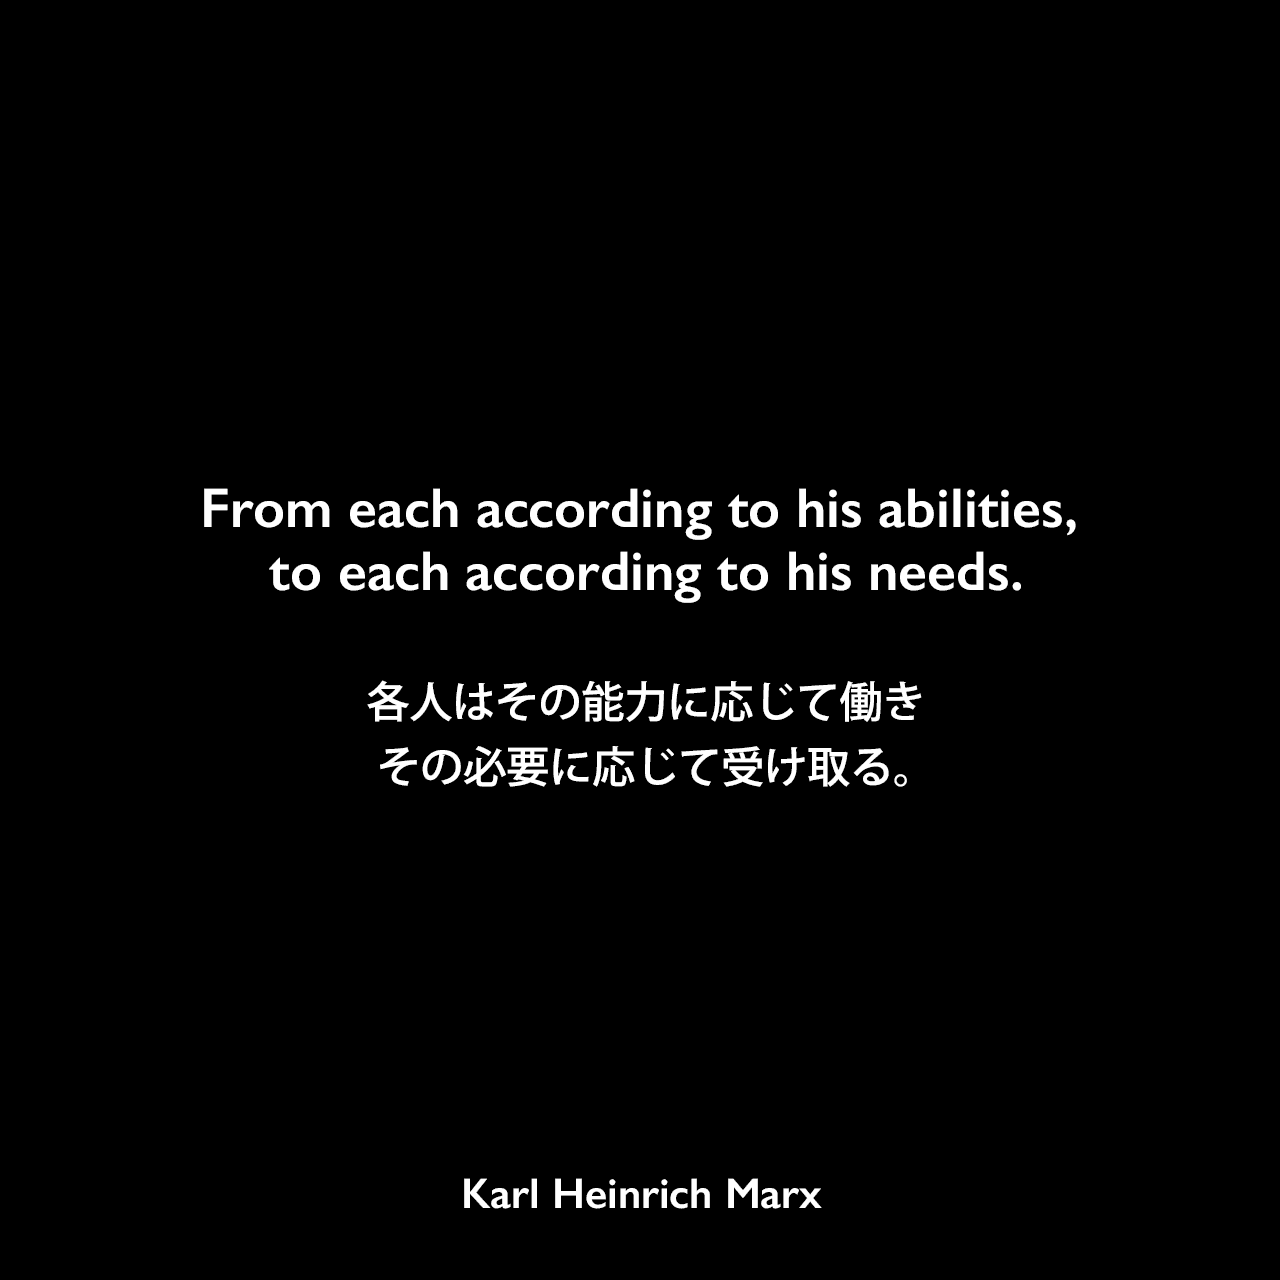 From each according to his abilities, to each according to his needs.各人はその能力に応じて働き、その必要に応じて受け取る。- カール・マルクス著「ゴータ綱領批判」のスローガンKarl Heinrich Marx